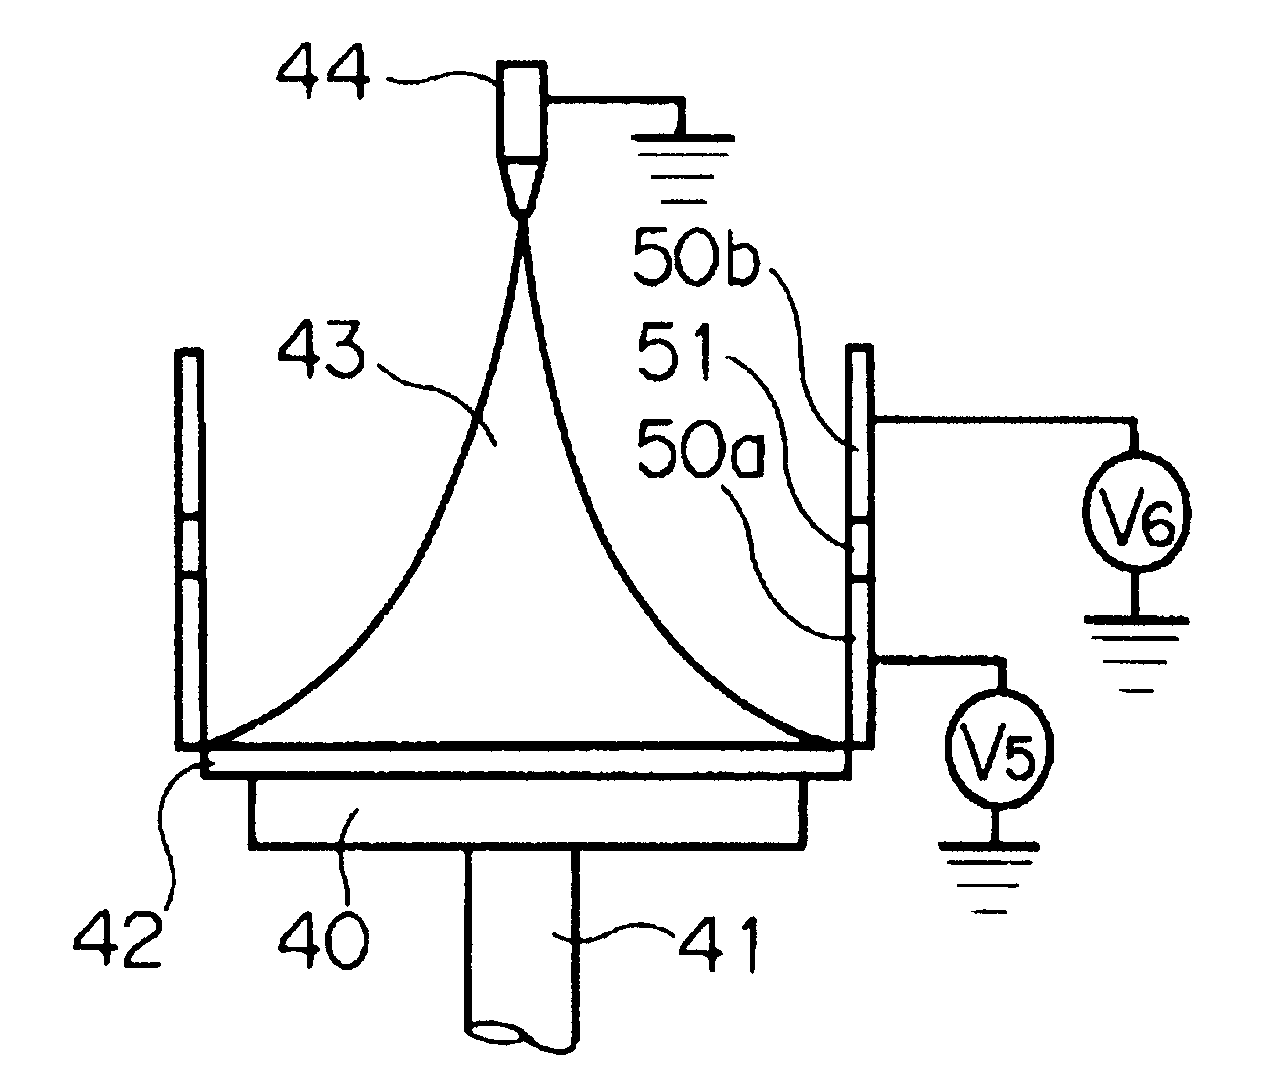 Apparatus for spin-coating semiconductor substrate and method of doing the same